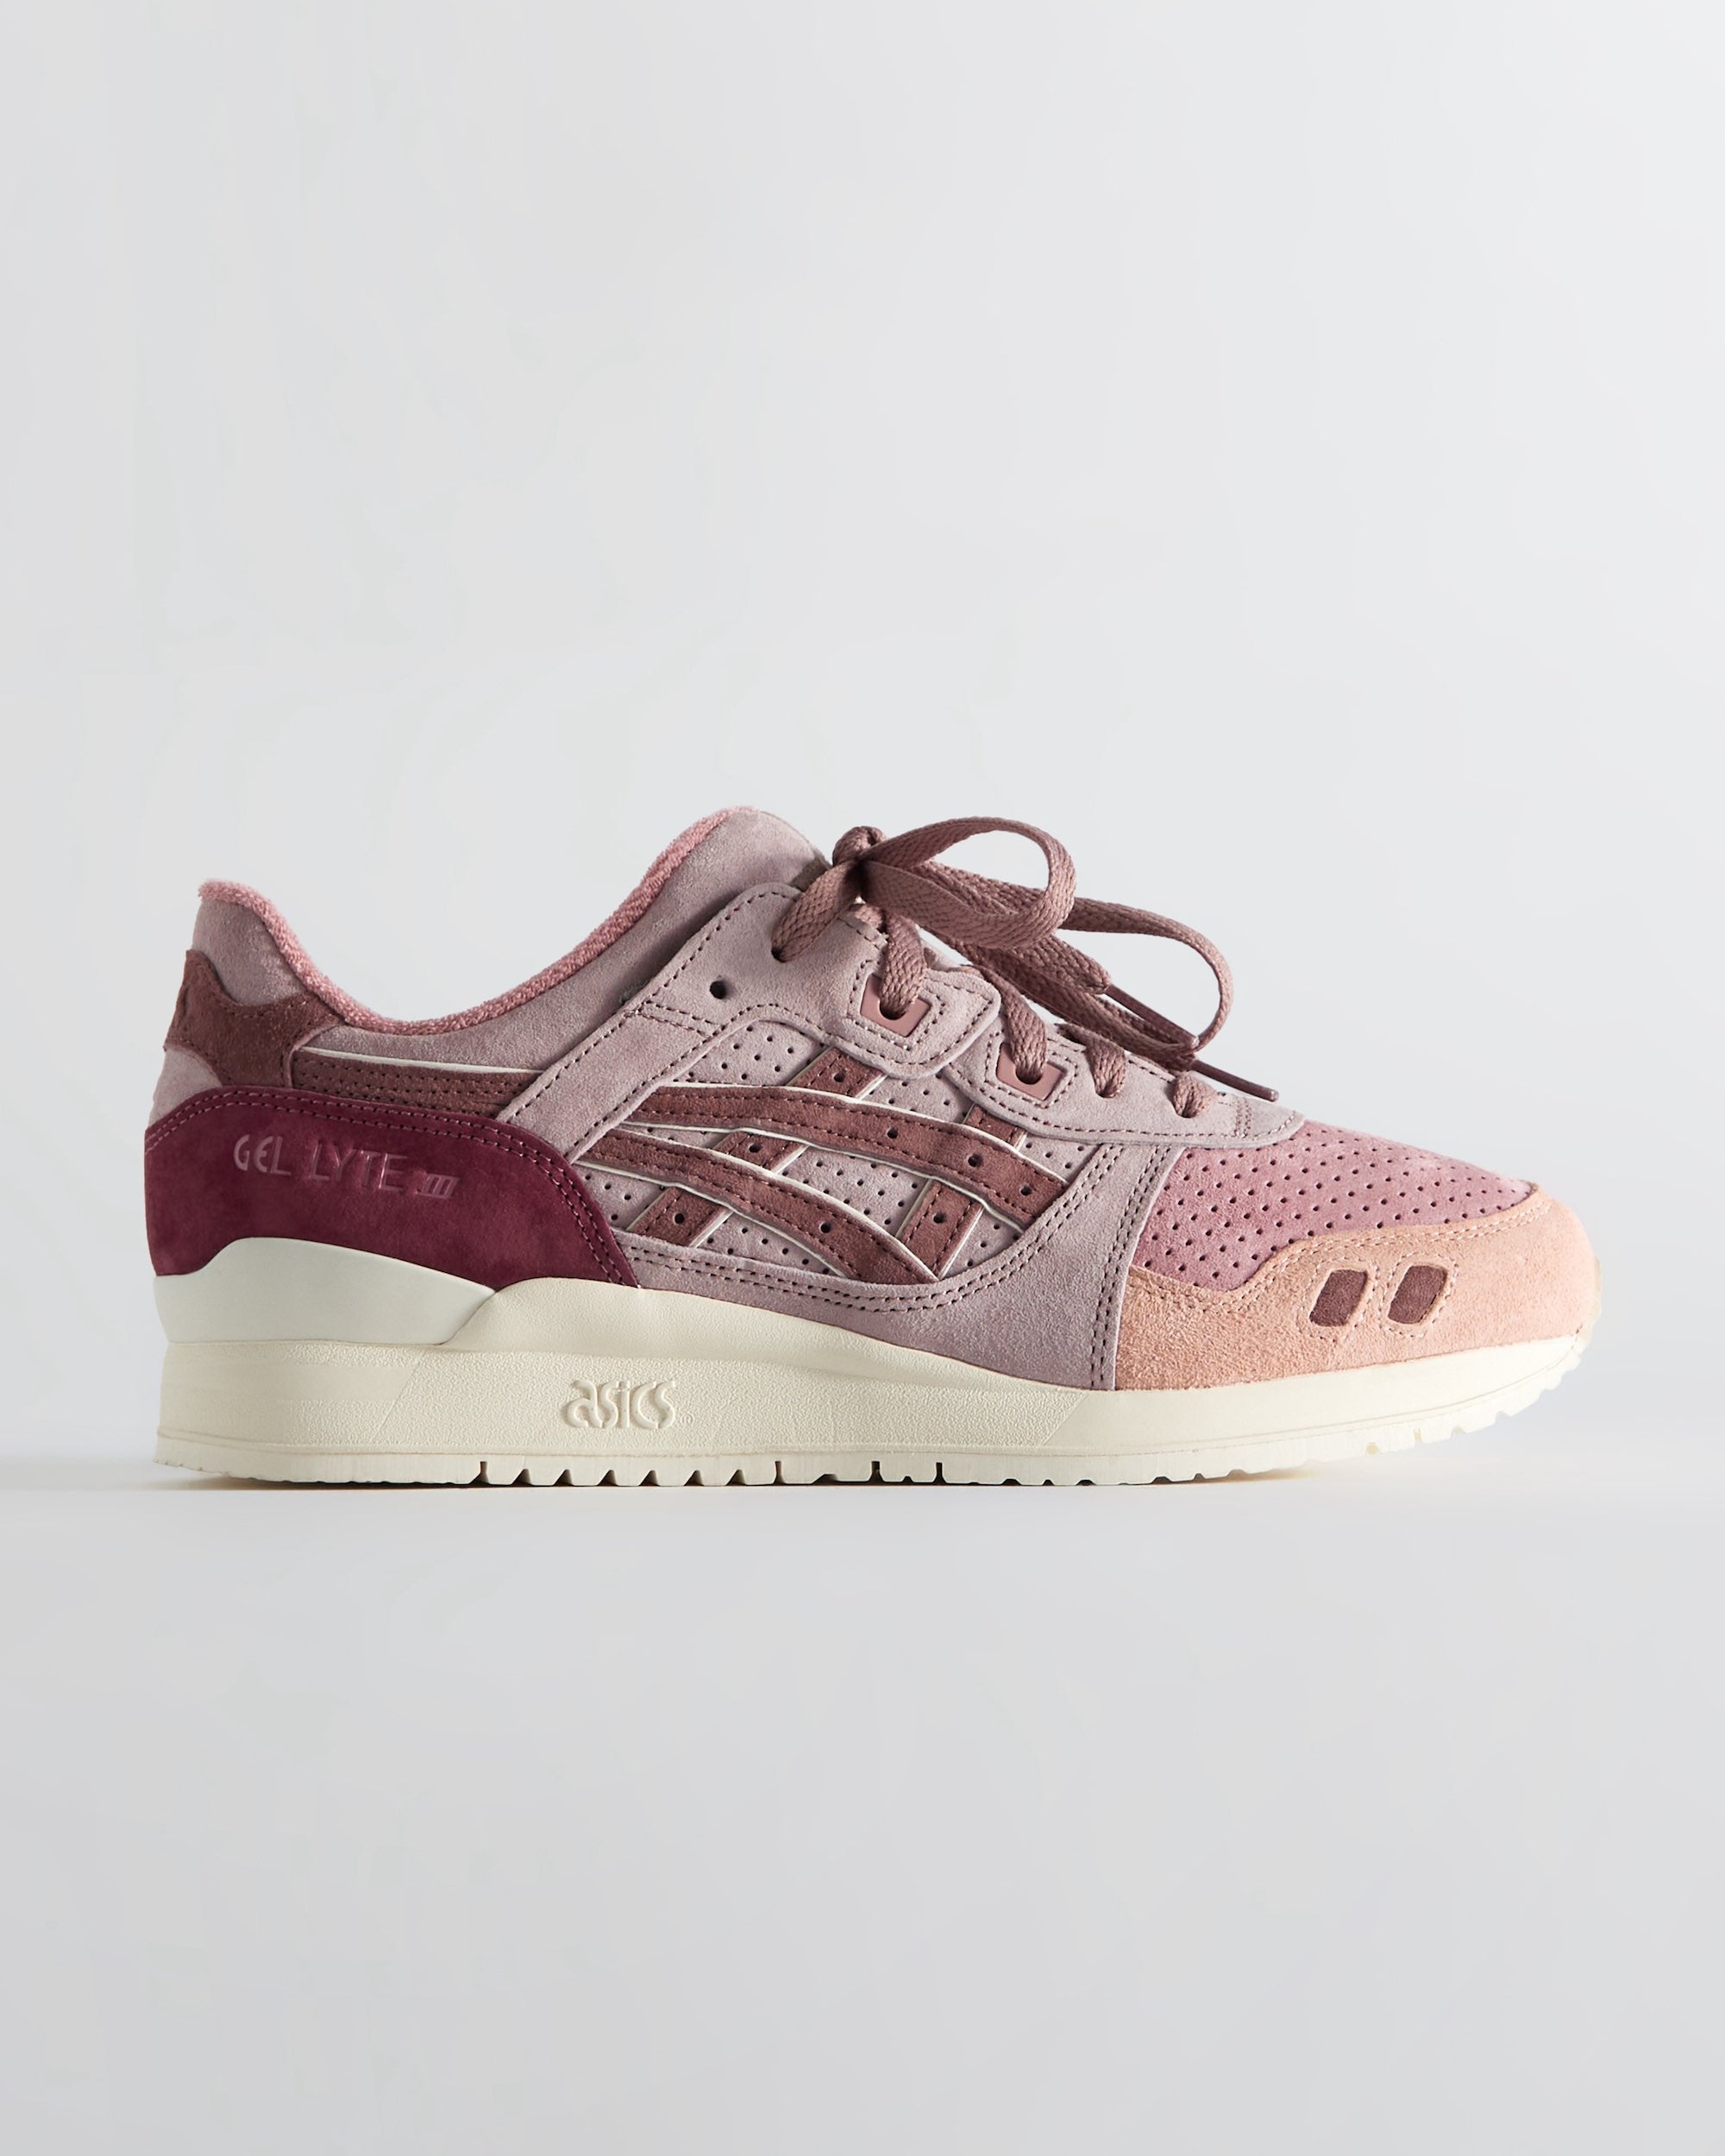 Ronnie Fieg for ASICS GEL-LYTE III By Invitation Only – Kith